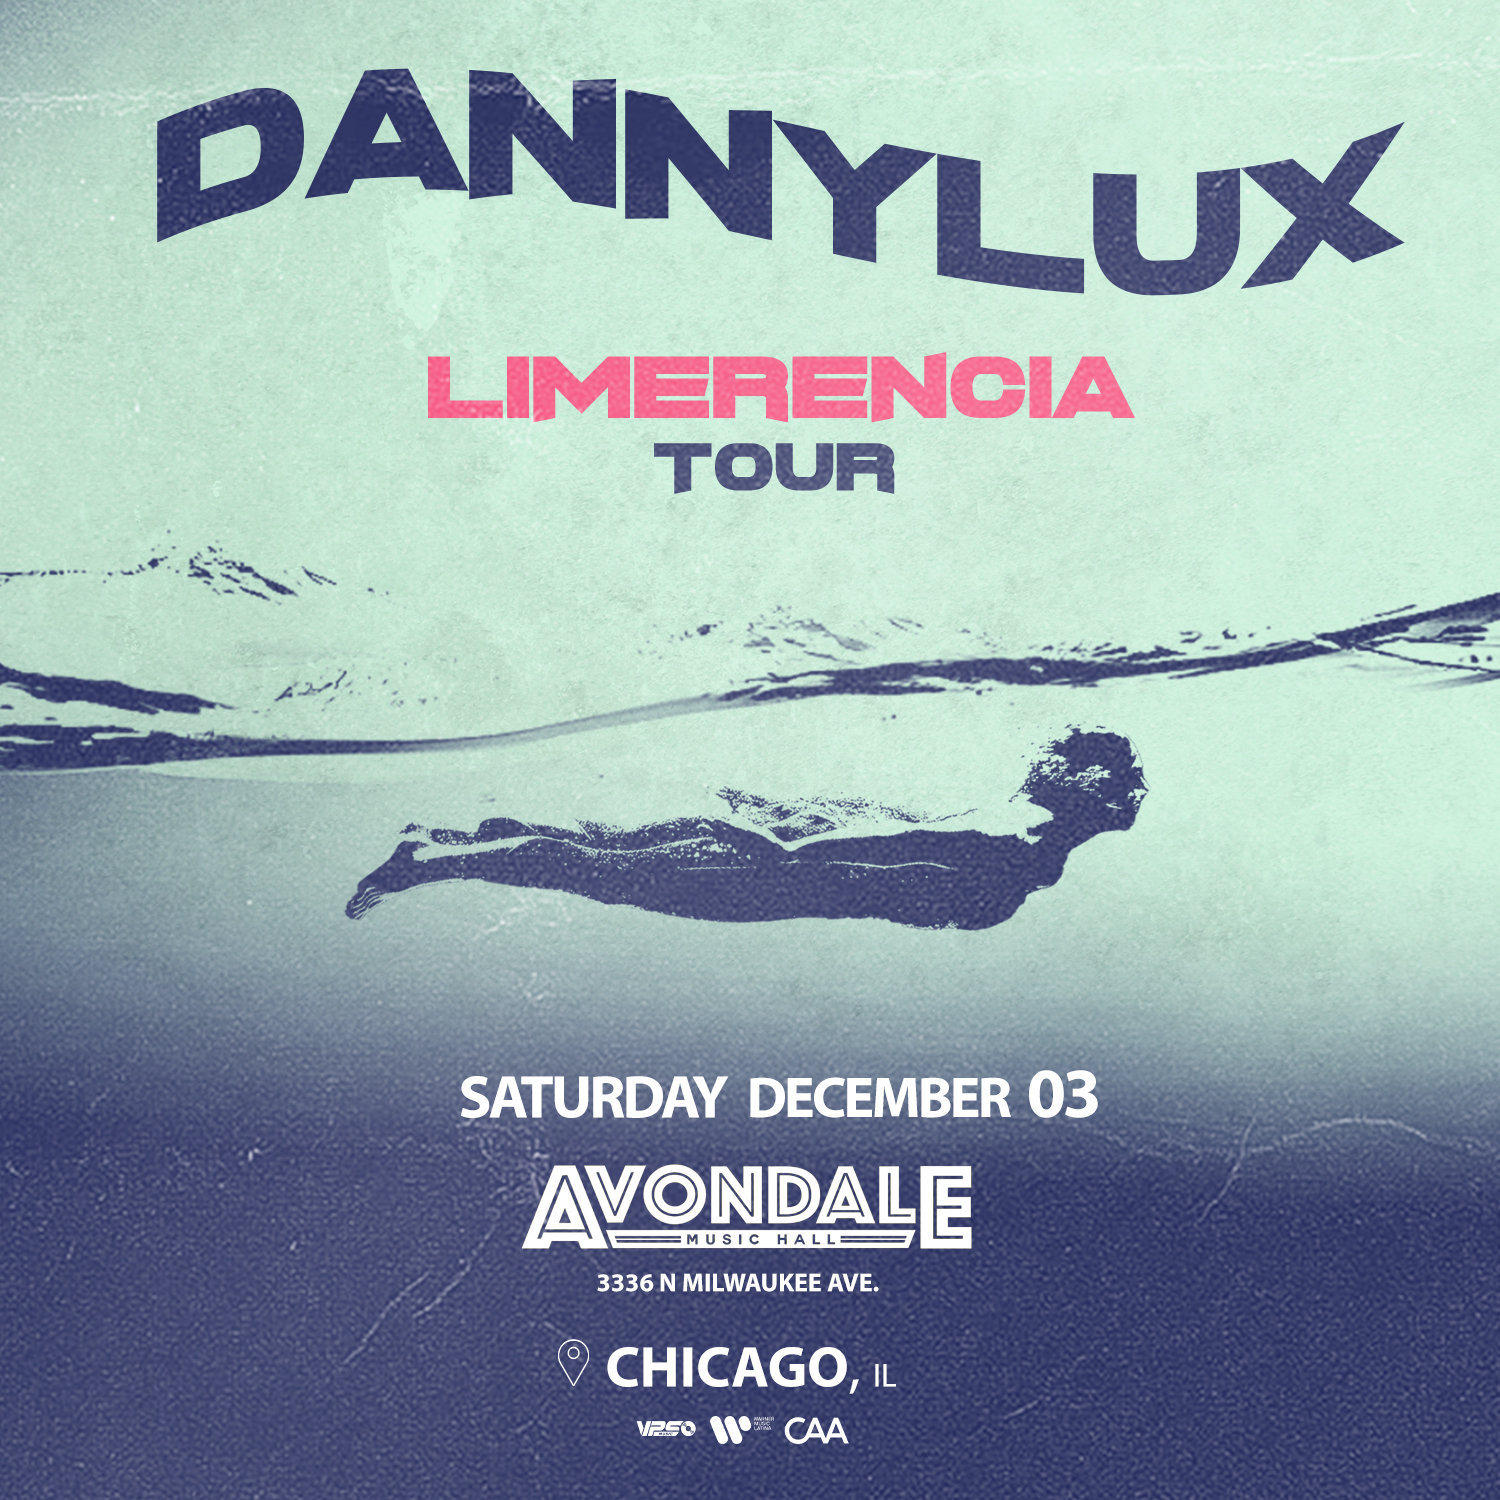 Buy Tickets to DannyLux Limerencia Tour in Chicago on Dec 03, 2022